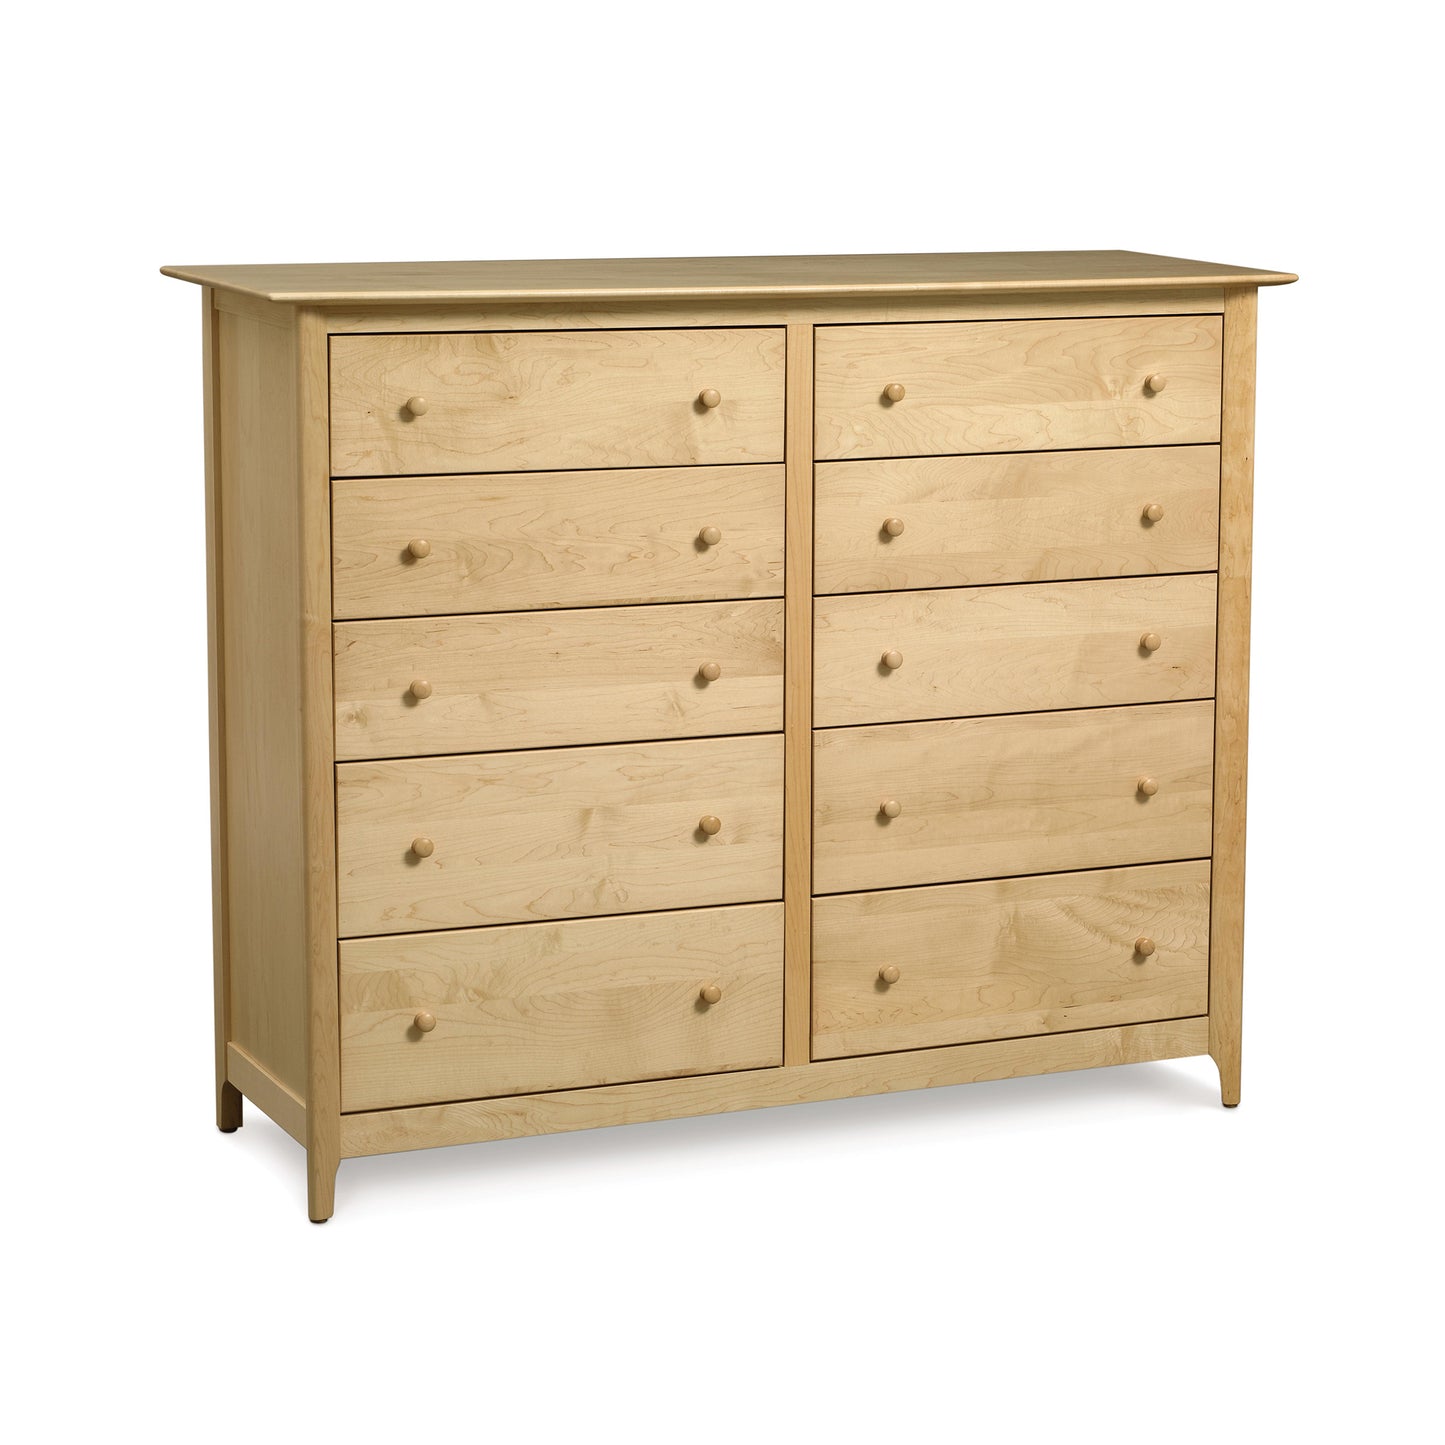 A Sarah 10-Drawer Dresser by Copeland Furniture with six solid wood drawers on a white background.